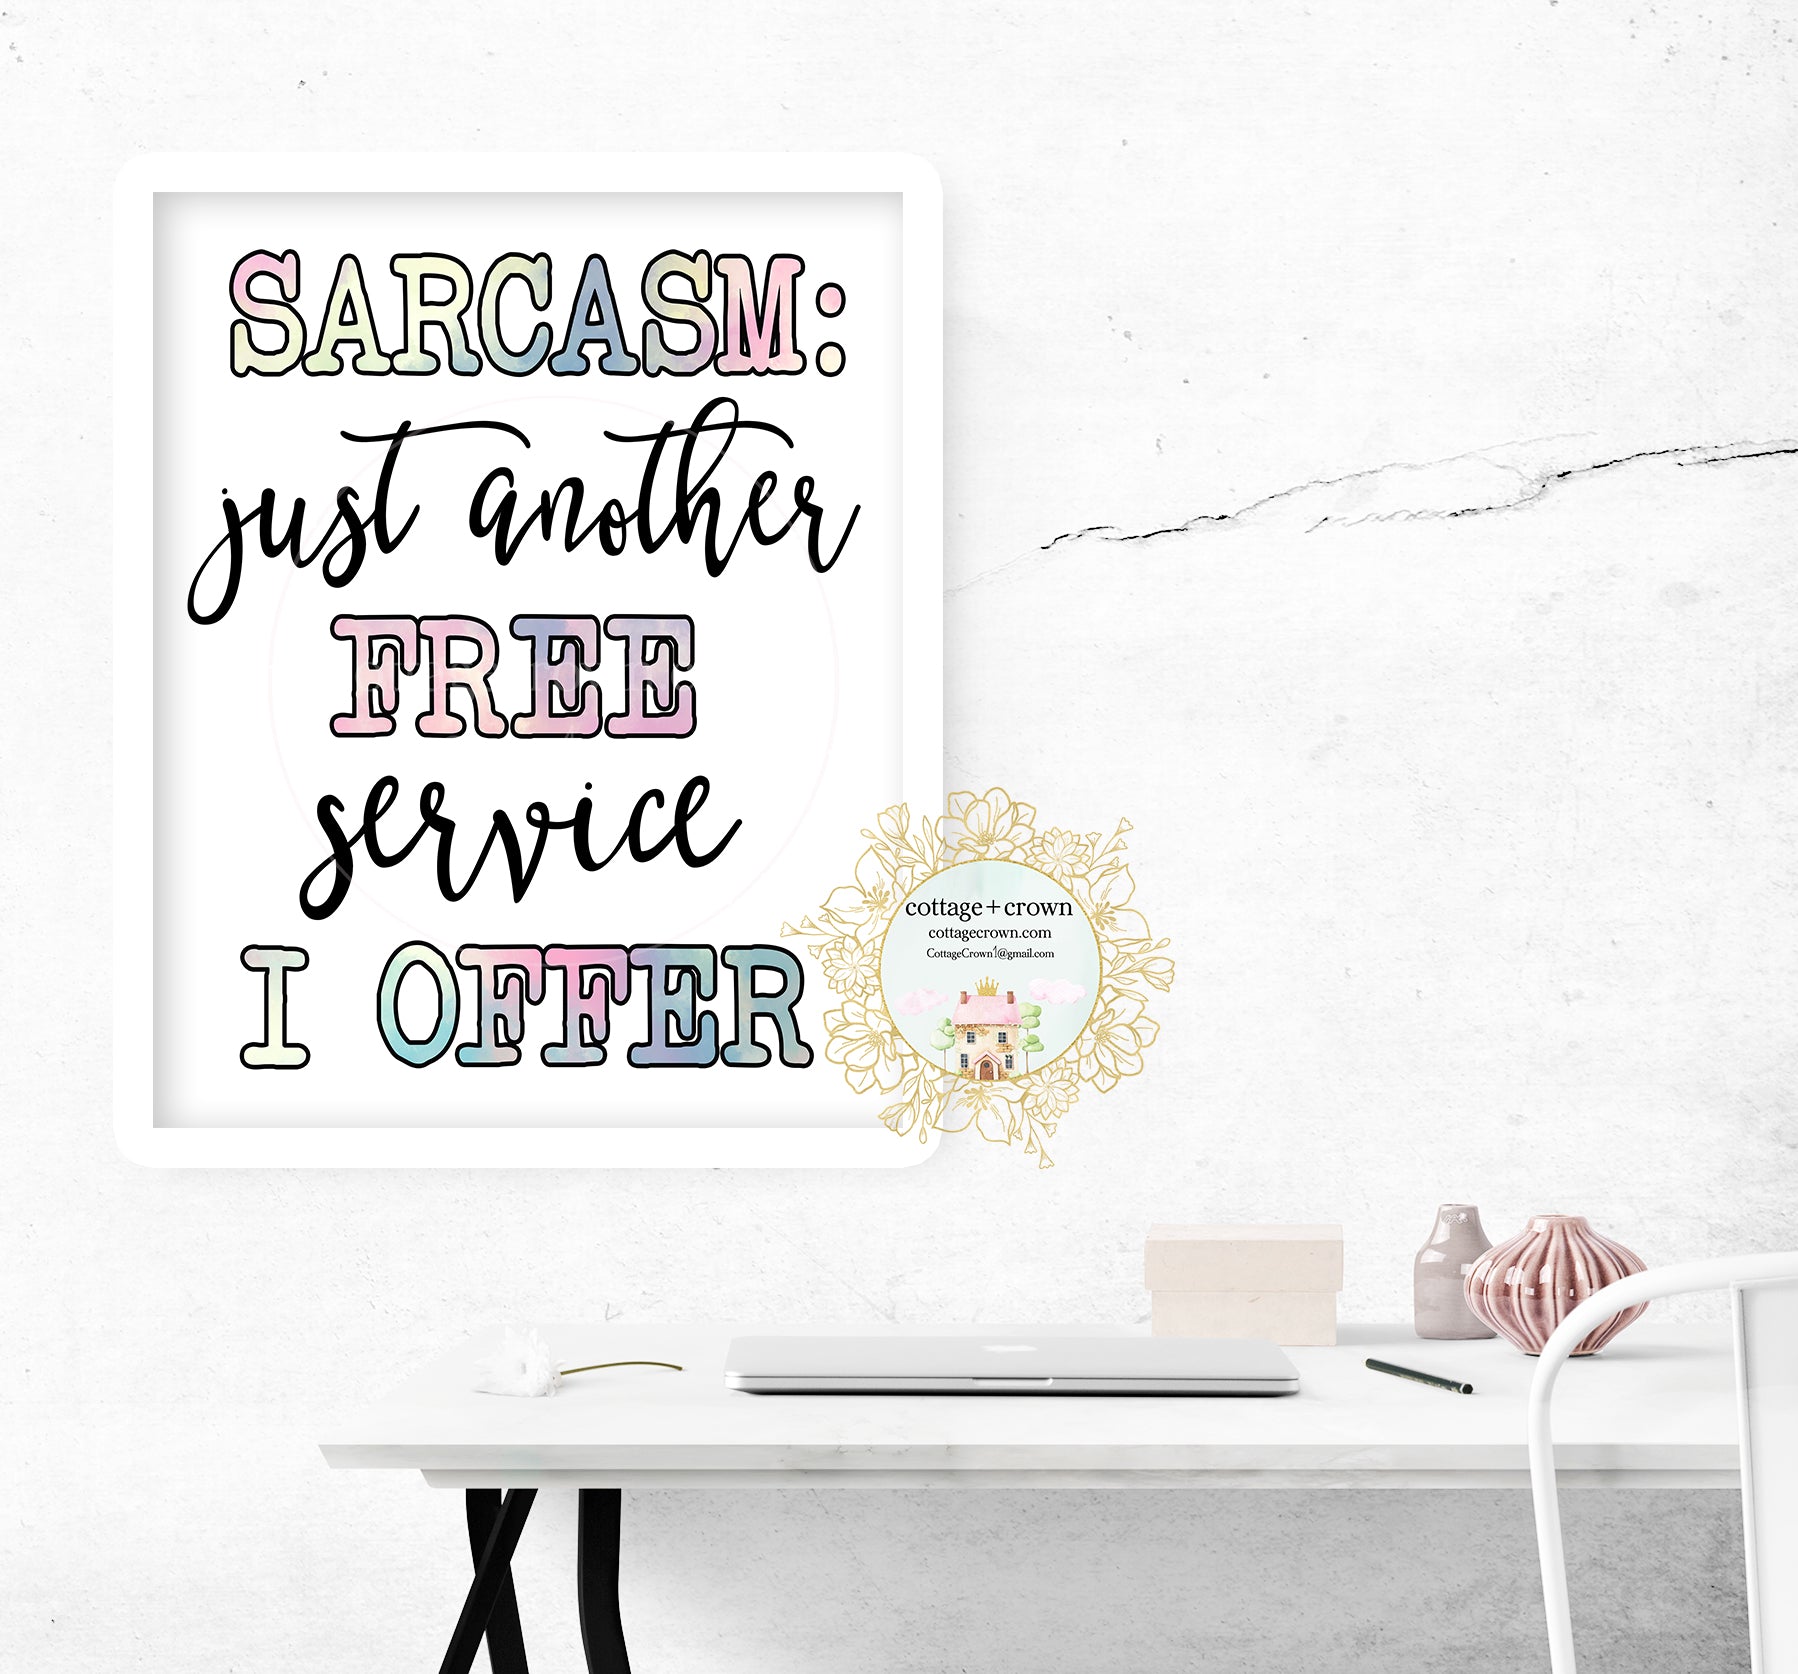 Sarcasm - Another Free Service I Offer - Preppy Rainbow Decor - Home + Office Wall Art Print